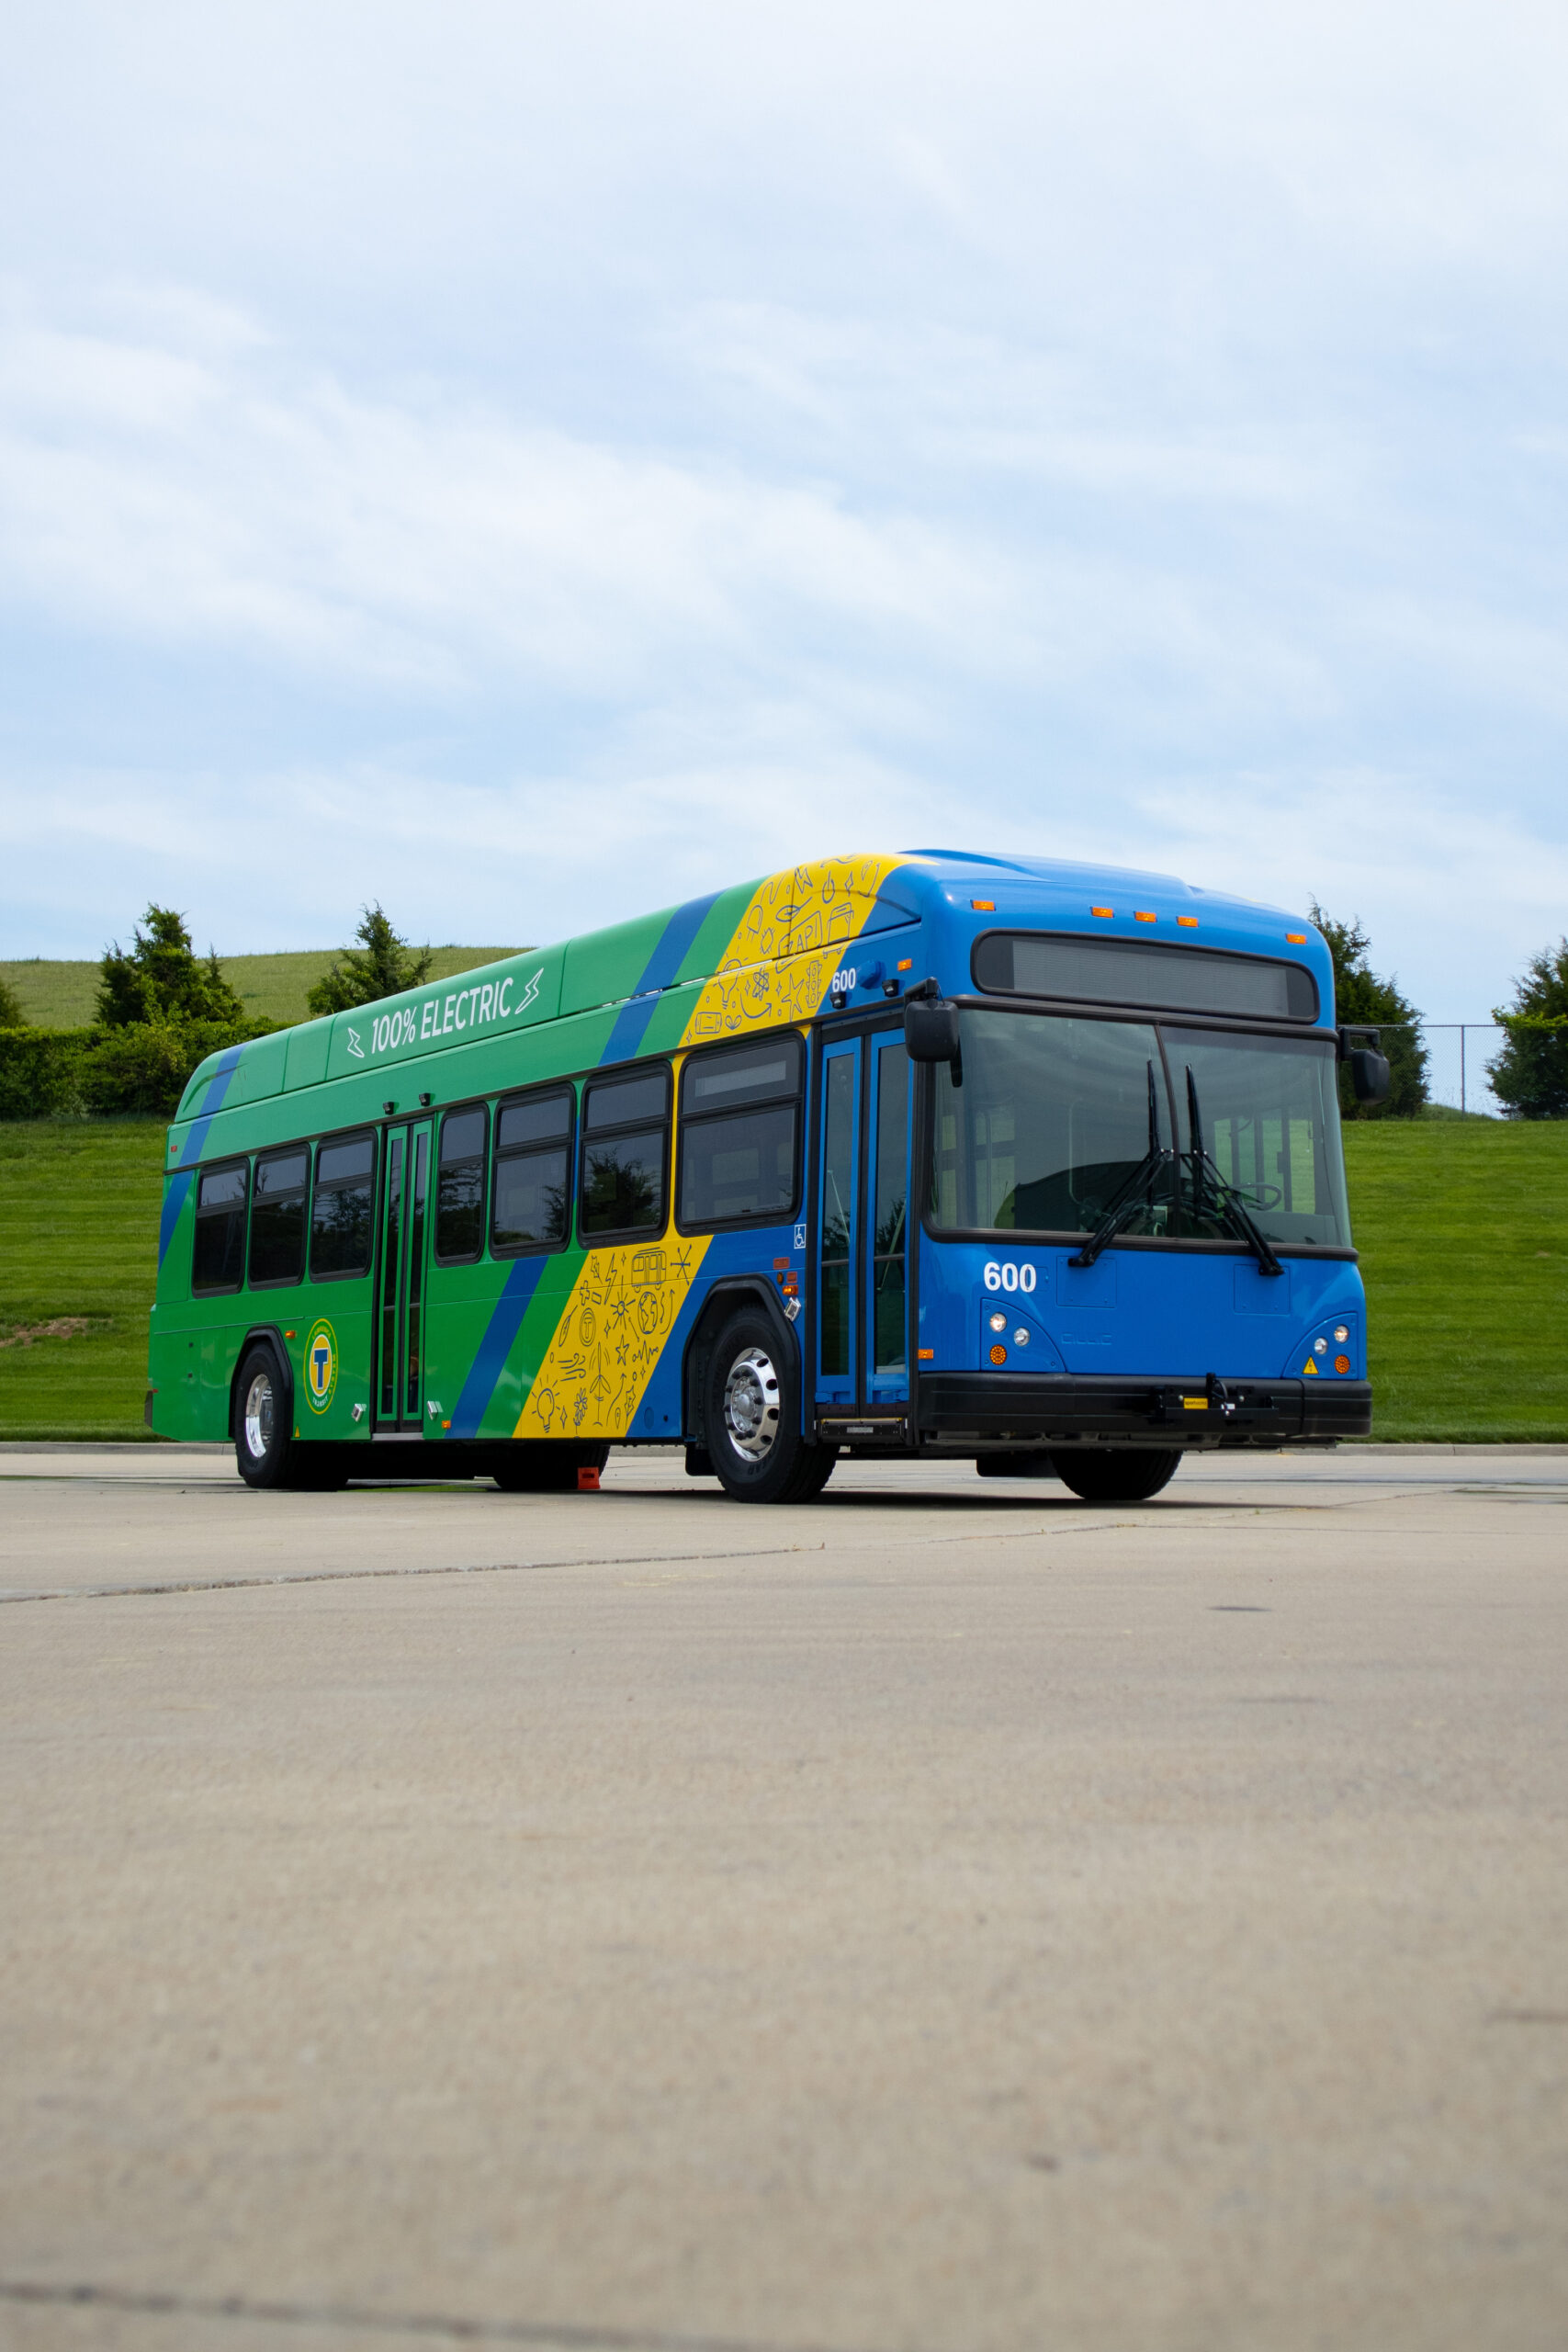 Featured image for “Lawrence Transit invites community to see first electric bus”